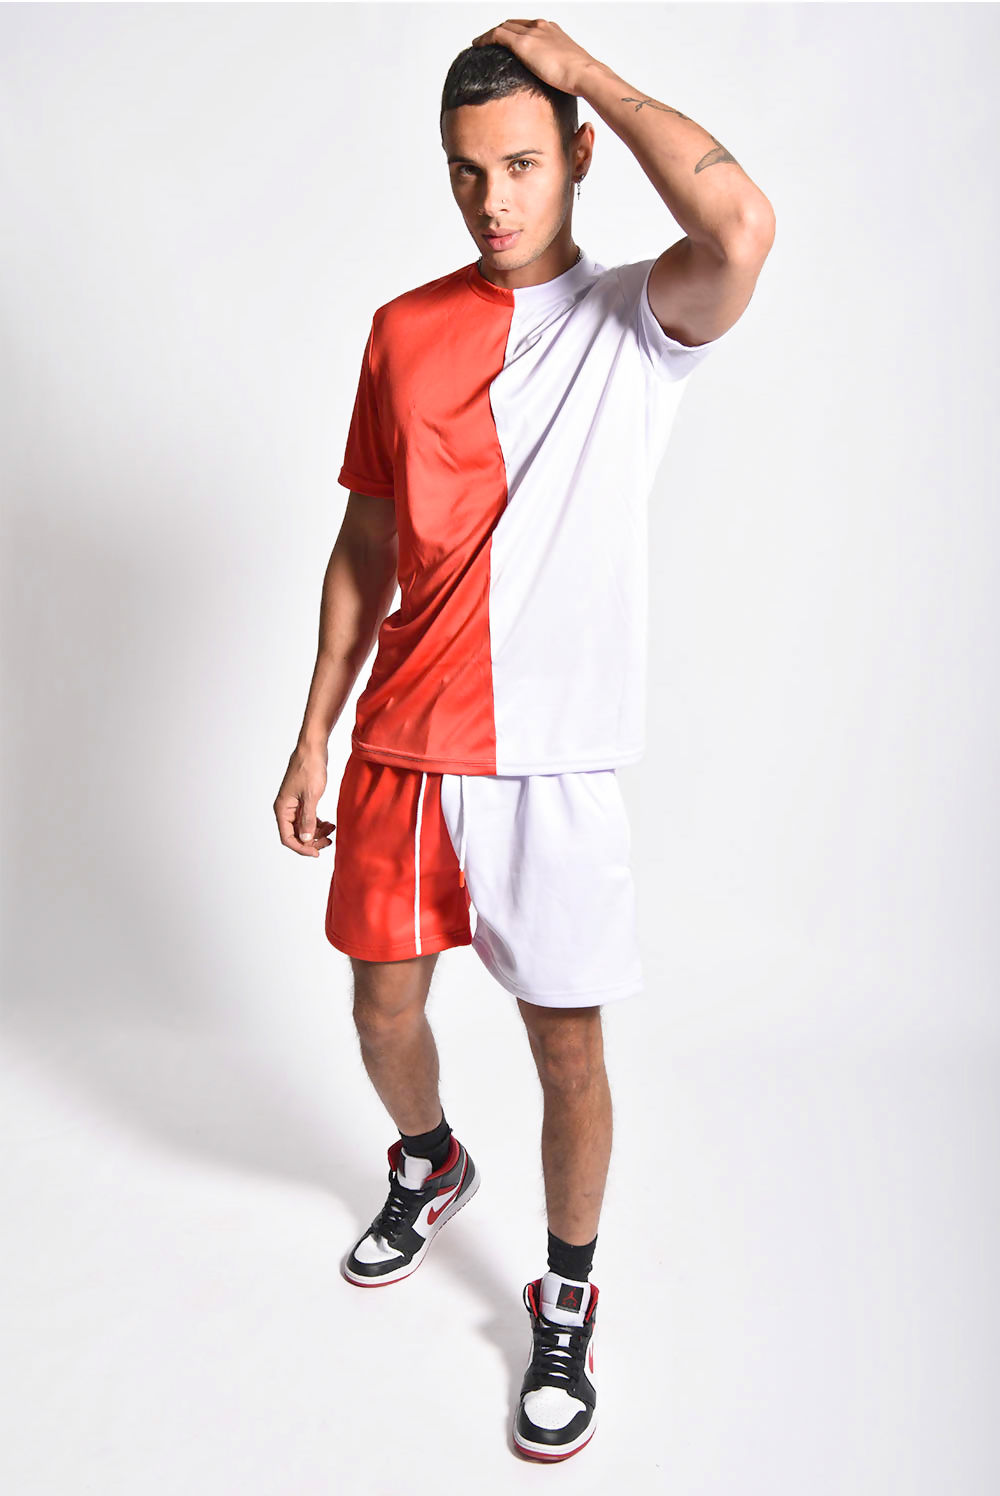 MENS COLOURBLOCK MUSCLE FIT SHORT SET RED AND WHITE